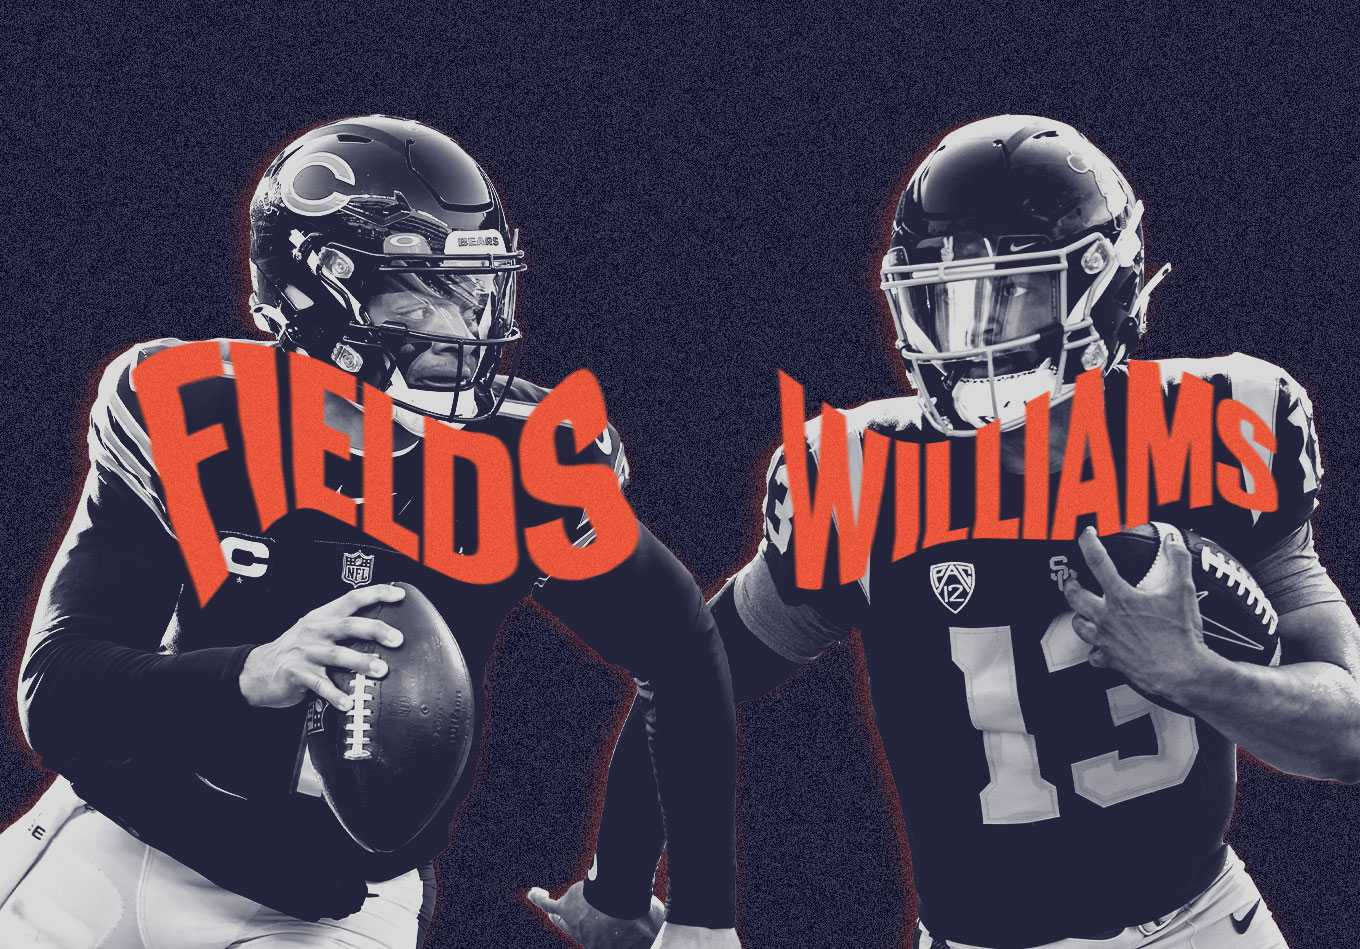 Should the Bears Trade Justin Fields and Take Caleb Williams With the No. 1 Pick?